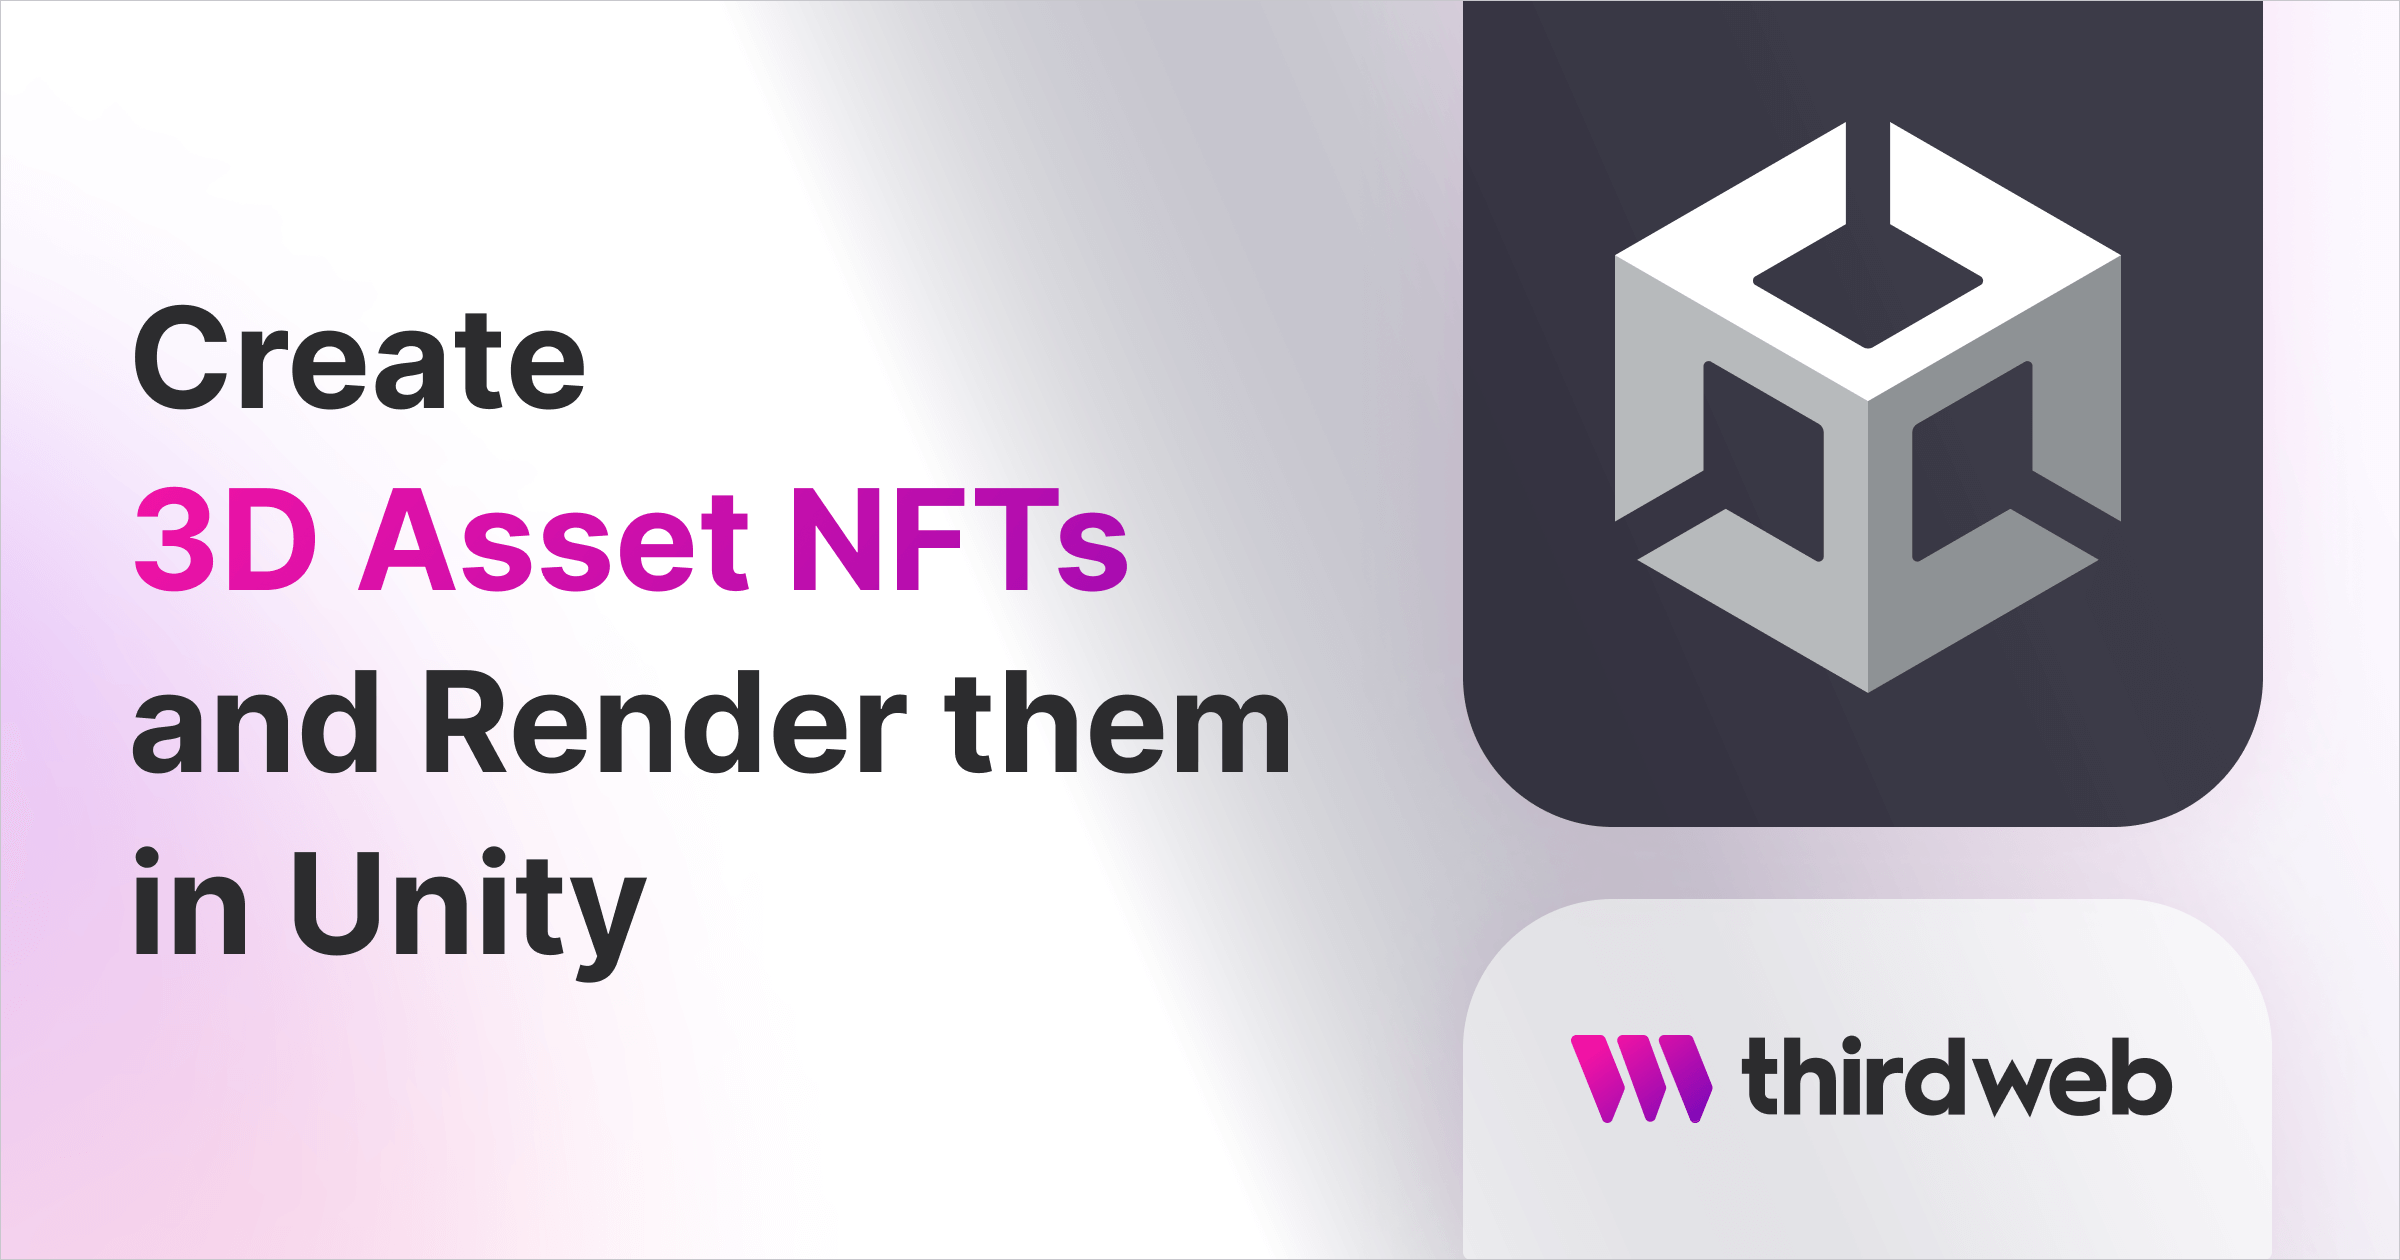 Create 3D Asset NFTs and Render them in Unity - thirdweb Guides